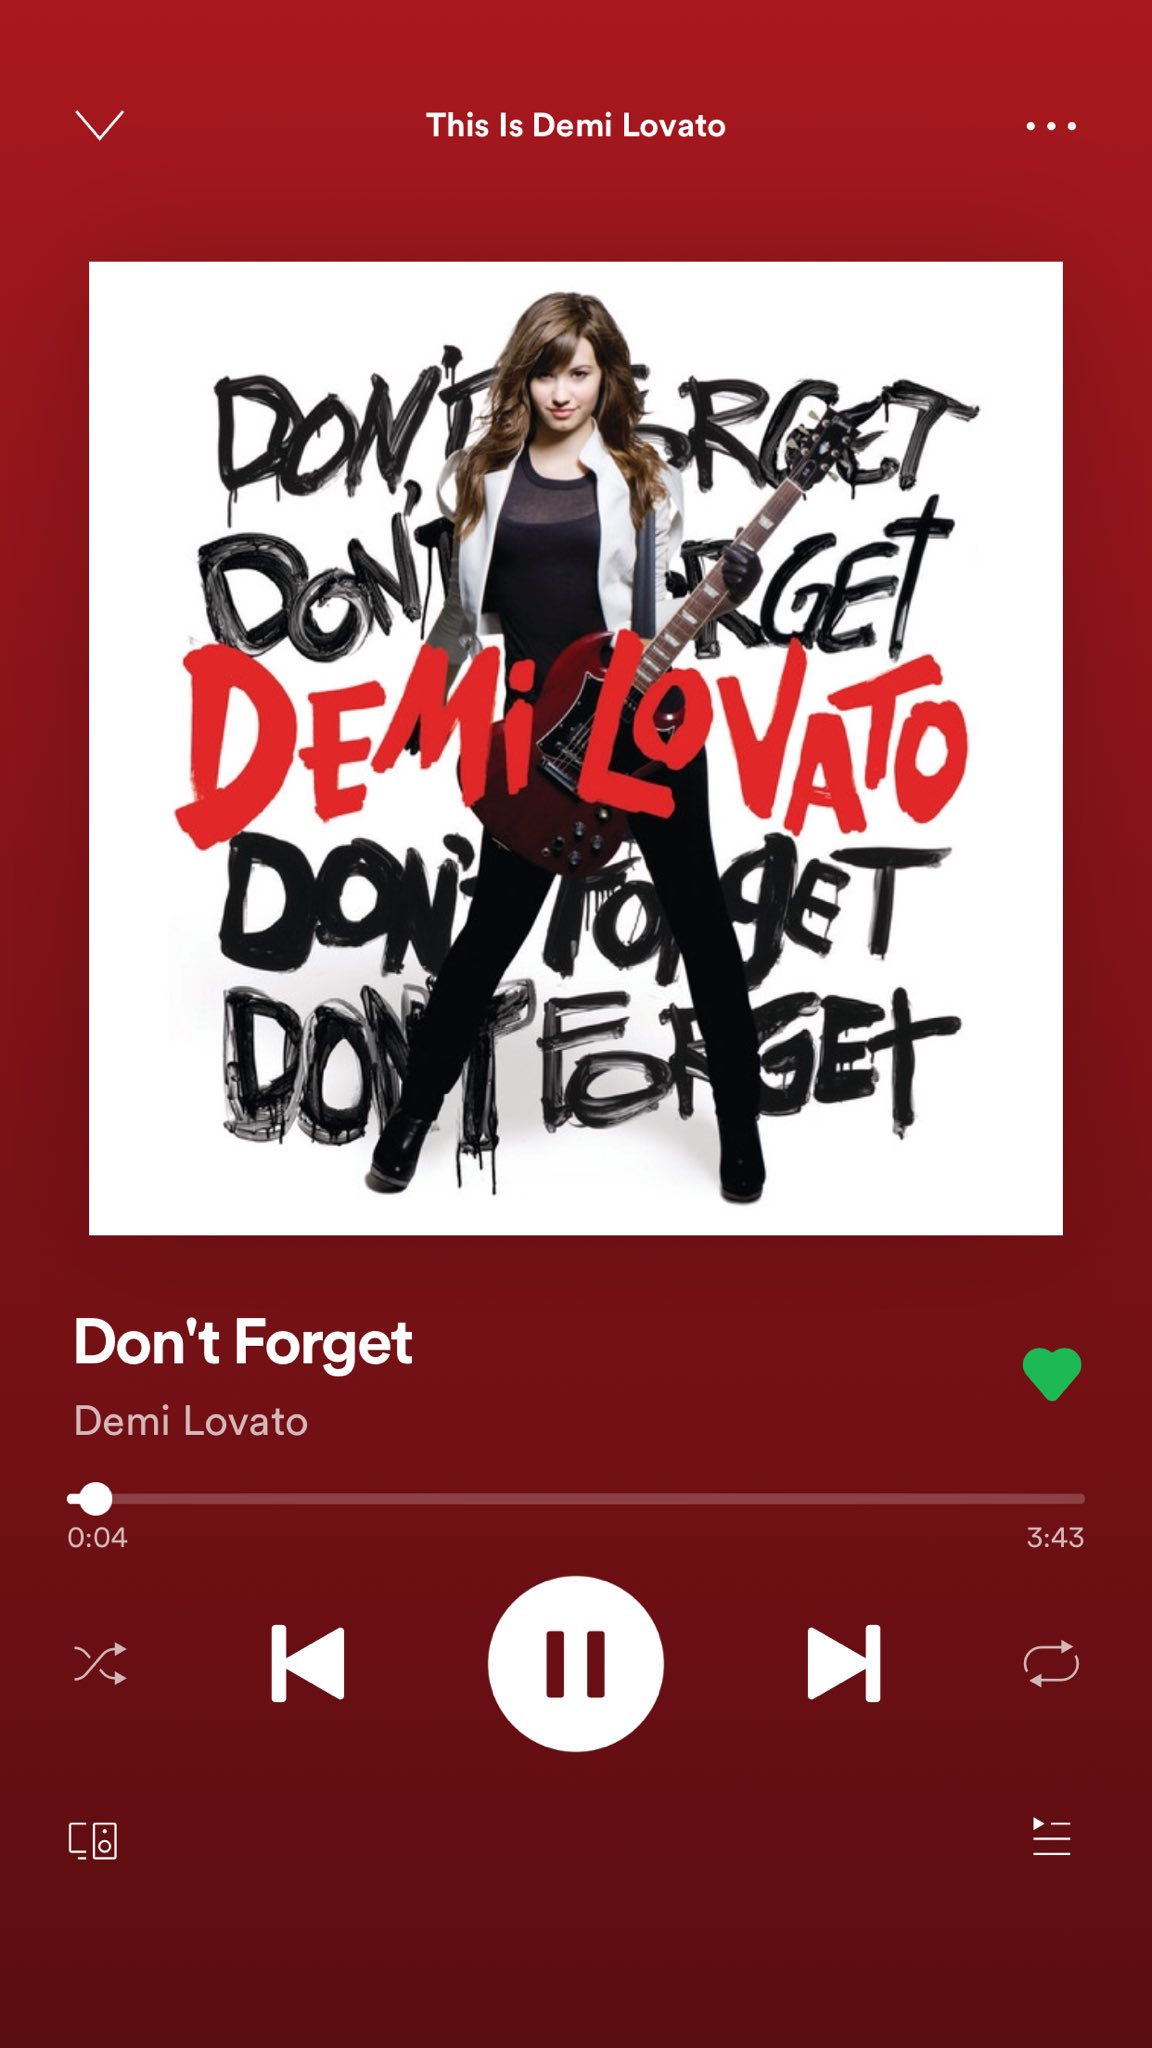 Not wishing demi lovato happy birthday until she releases another banger like this 